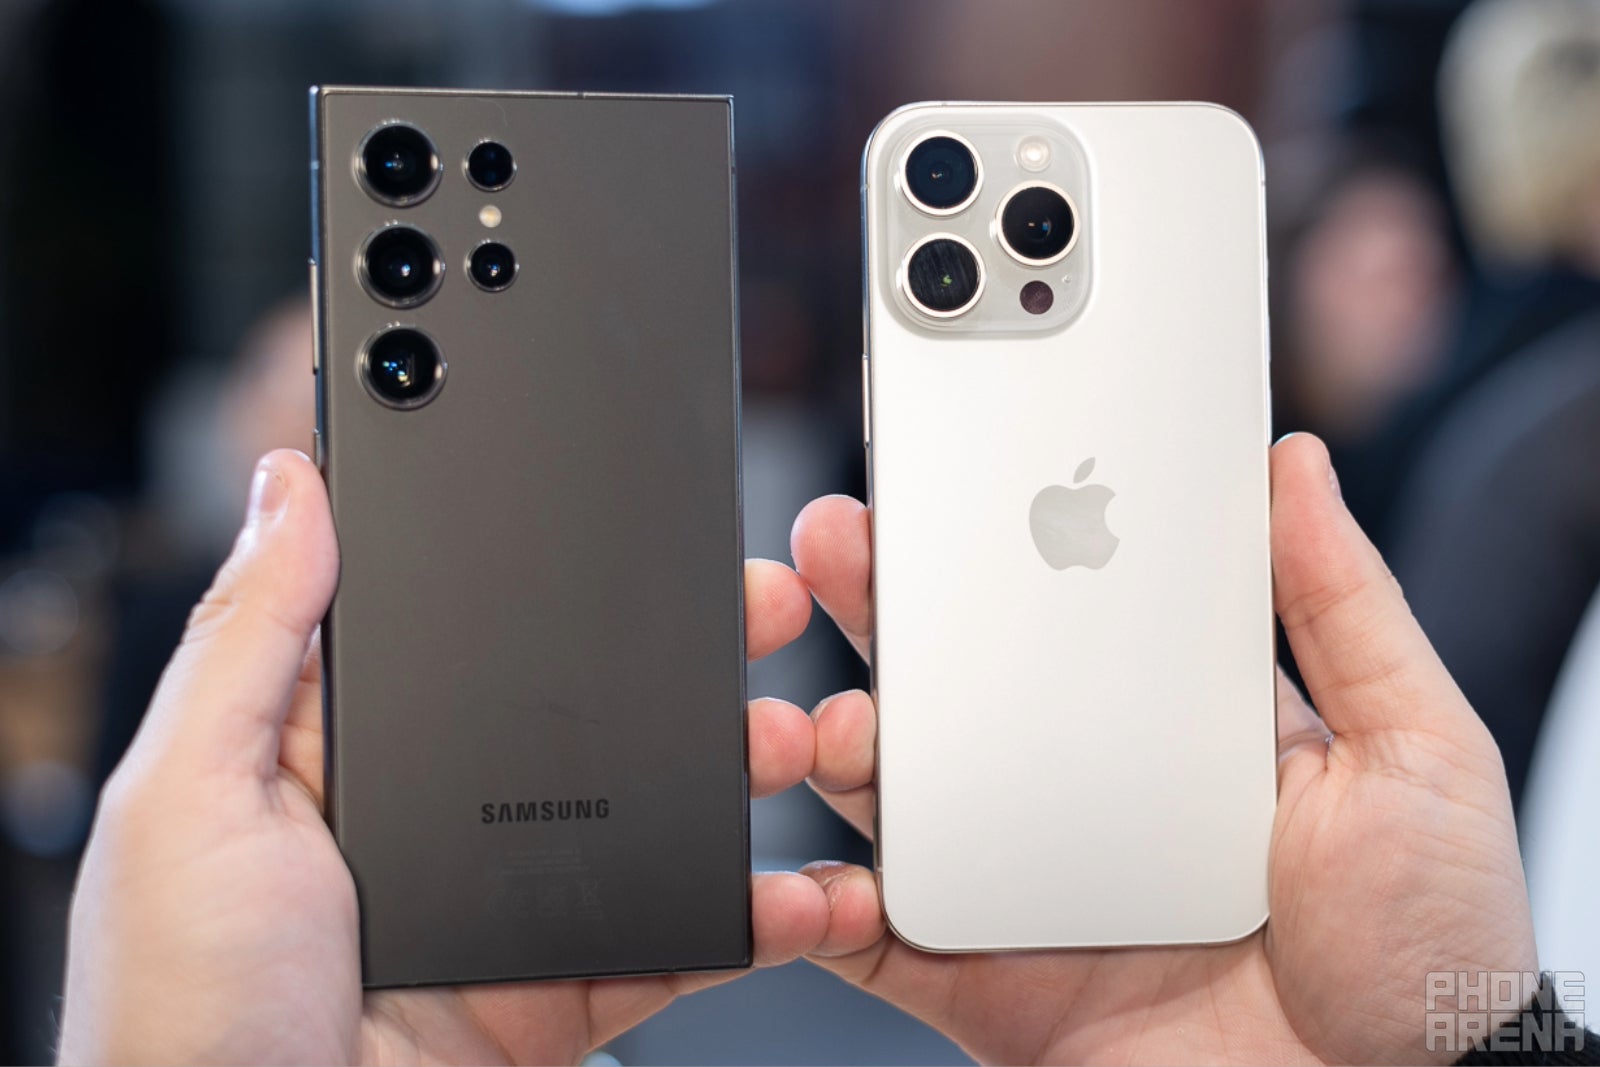 The Galaxy S24 Ultra next to the iPhone 15 Pro Max (Image credit – PhoneArena) – iPhone vs. Galaxy duel is sparked by Rihanna concert, but are phone cameras really that different anyway?